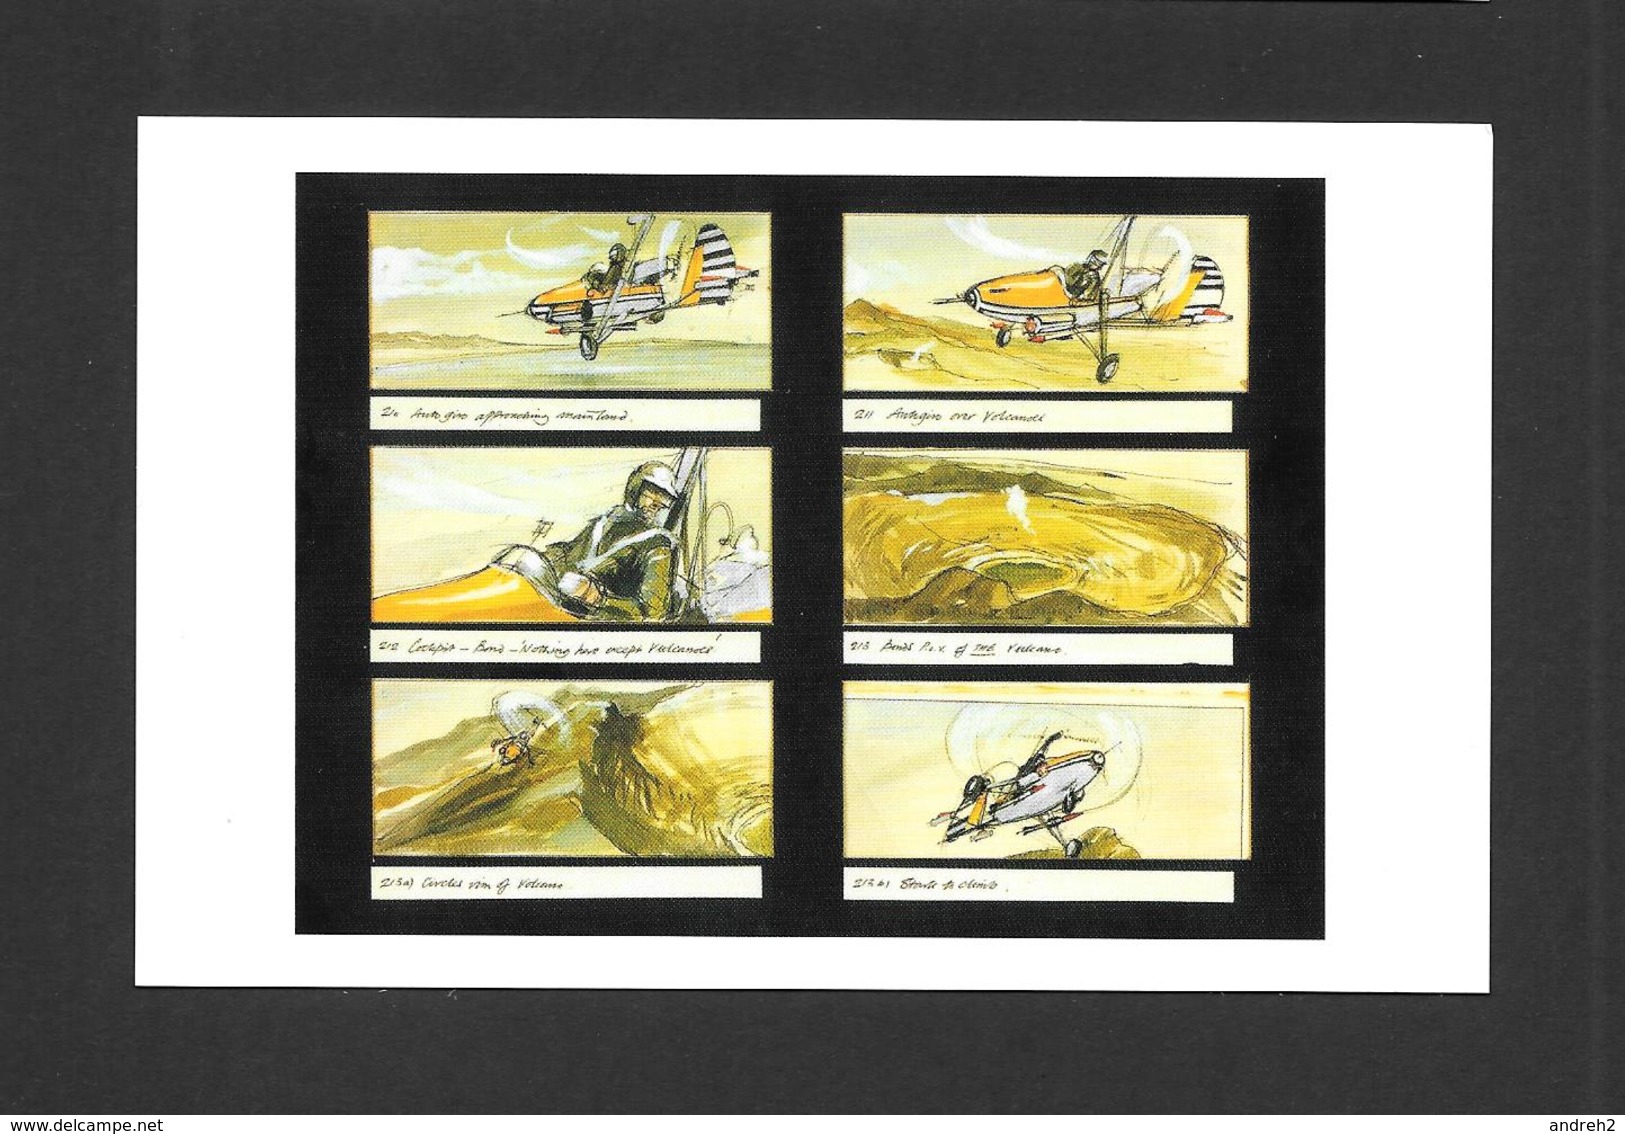 AFFICHES - CARTE POSTALE - JAMES BOND AGENT 007 - STORYBOARD FEATURING FLYING NELLIE  FOR YOU ONLY LIVE TWICE (1967) - Affiches Sur Carte